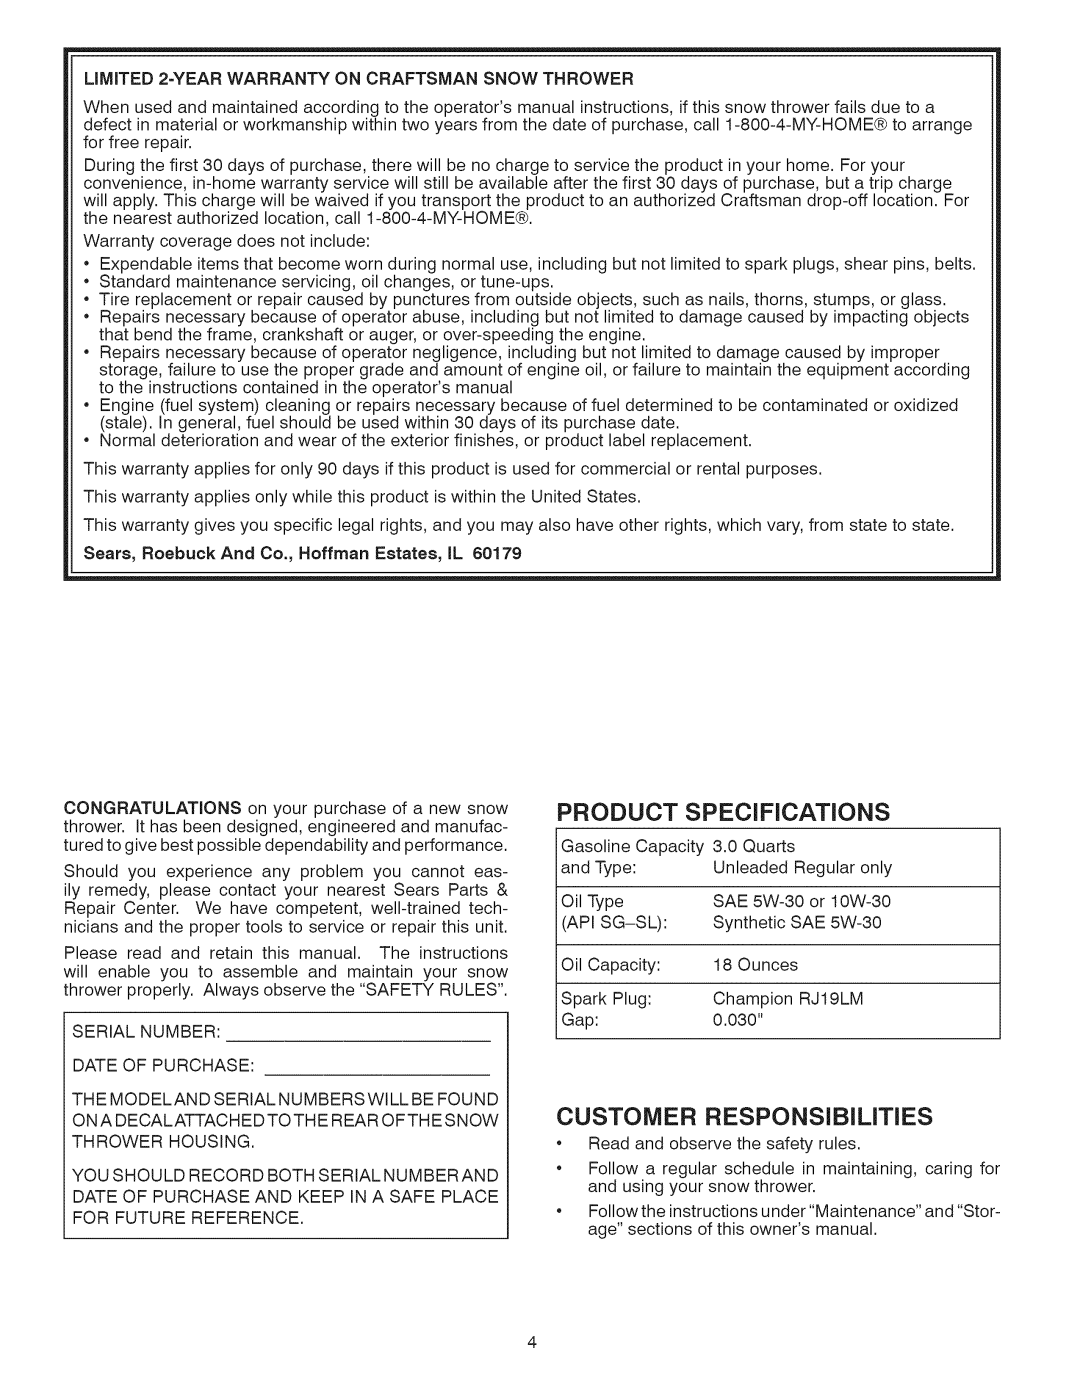 Craftsman 917.881064 Product Specifications, Customer Responsibilities, Sears, Roebuck And Co., Hoffman Estates, IL 